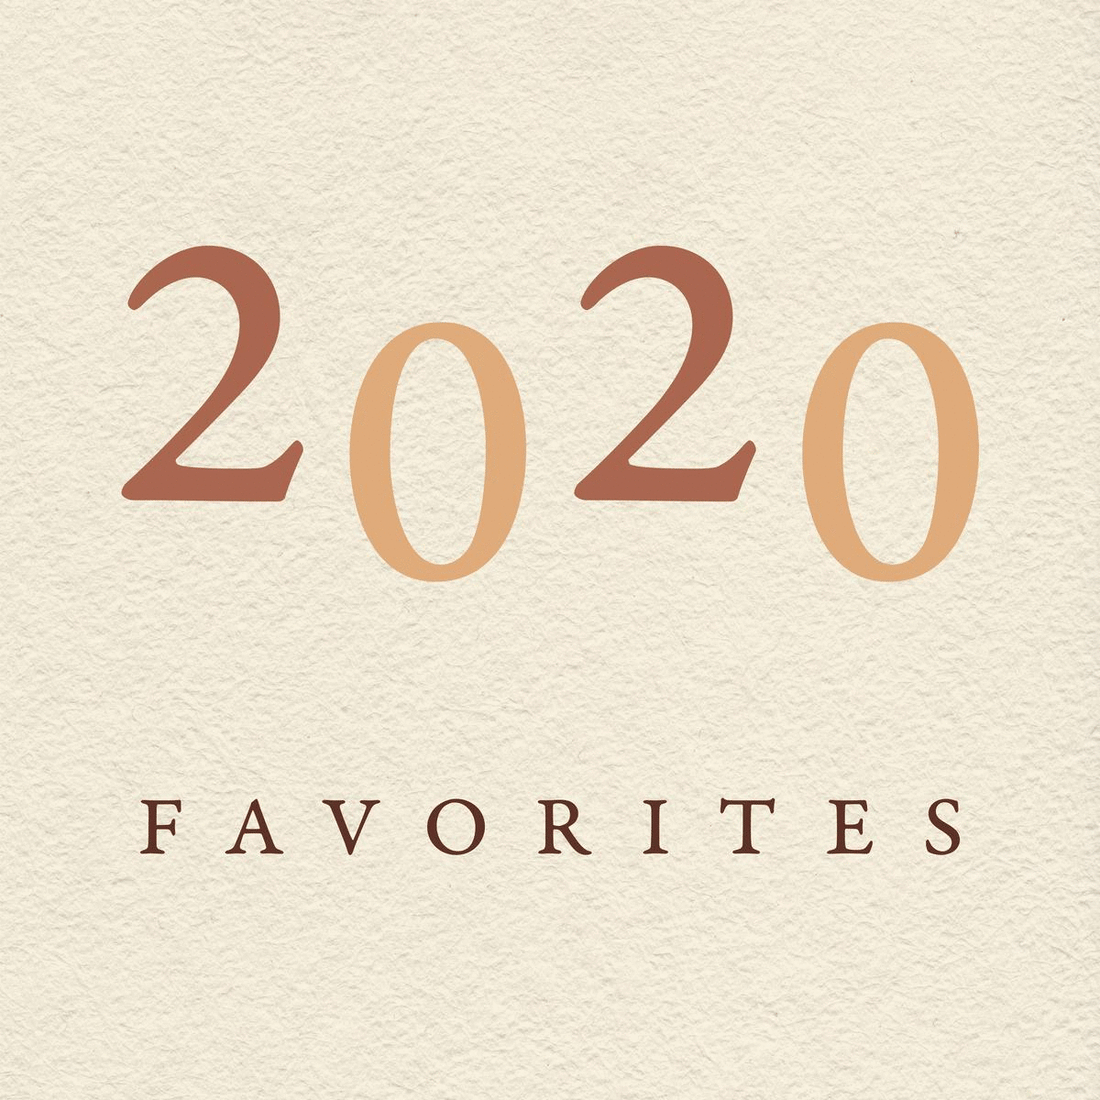 A Few of Our Favorite Things – 2020 Edition